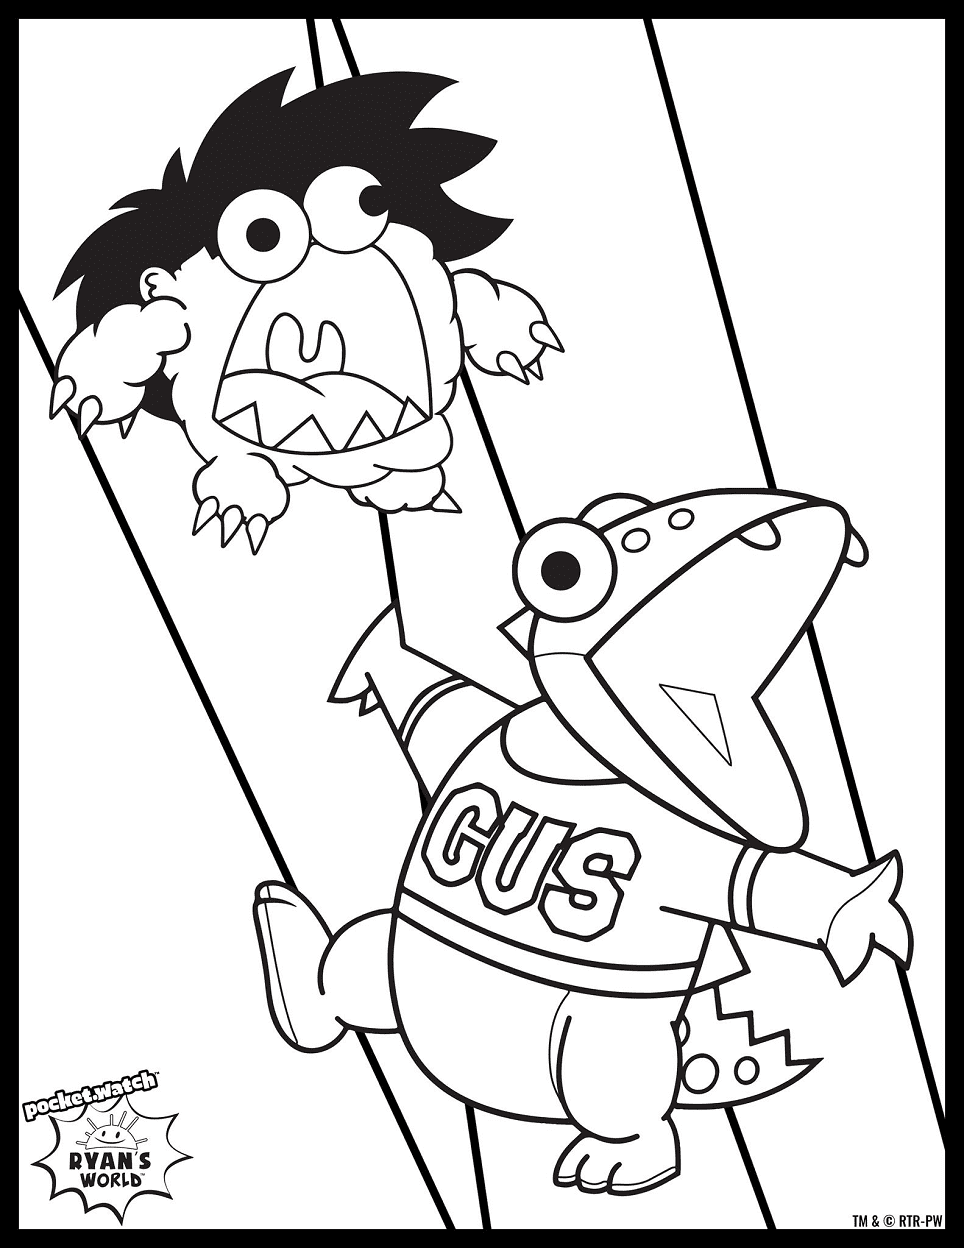 Gus and Moe Coloring Pages